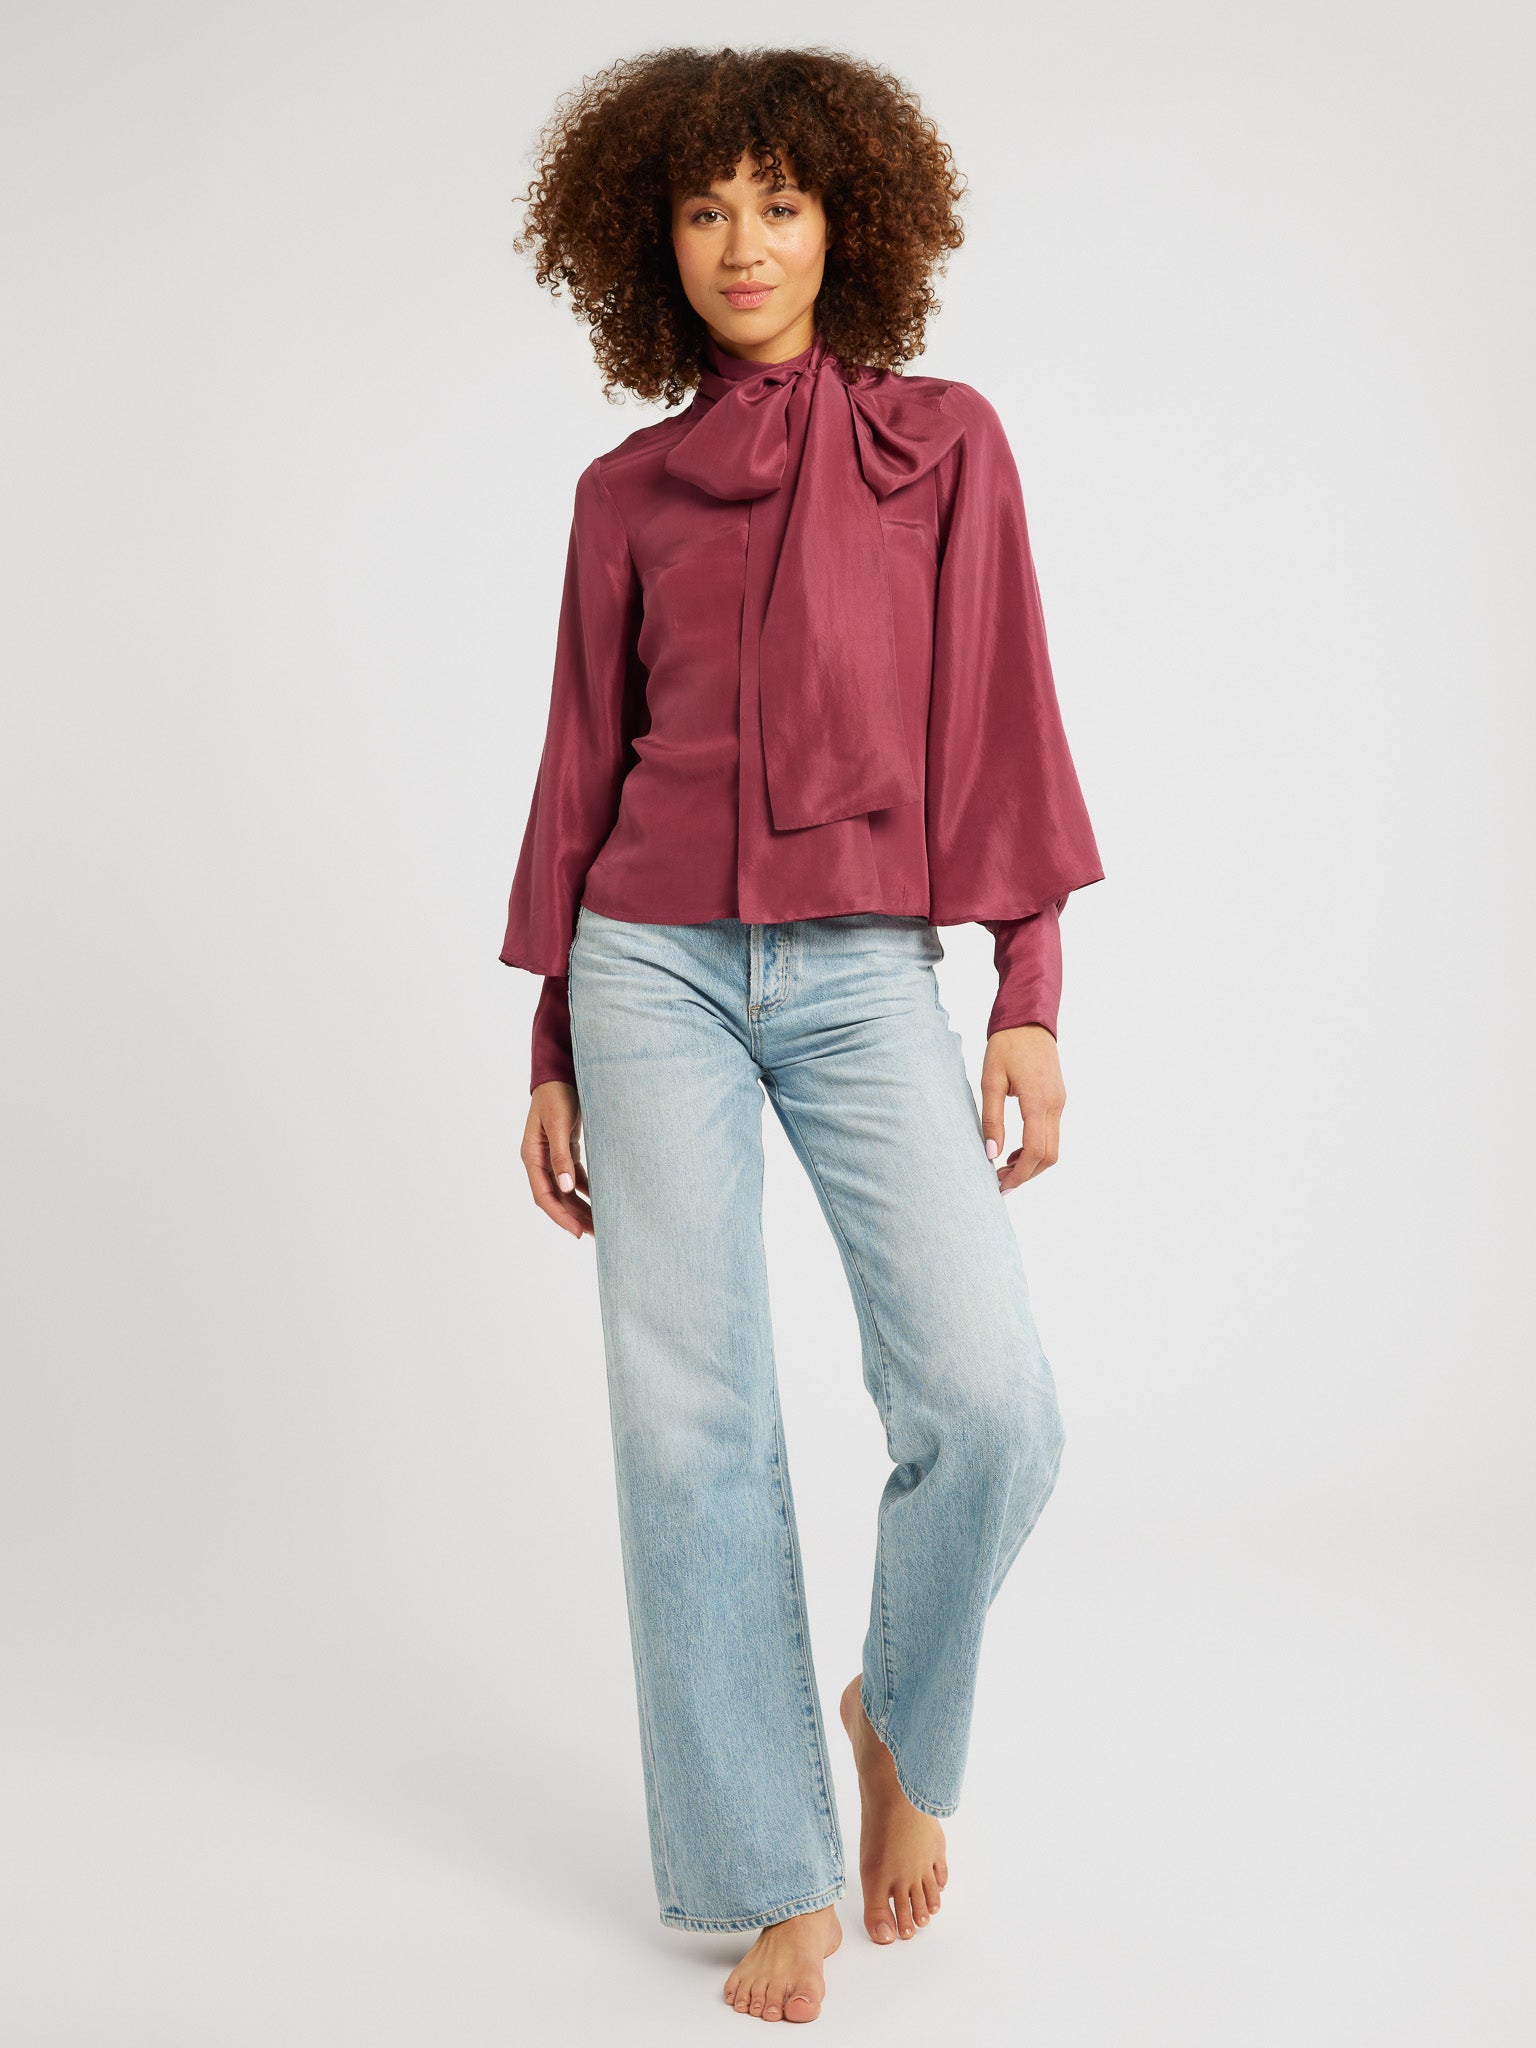 MILLE Clothing Gigi Top in Plum Washed Silk